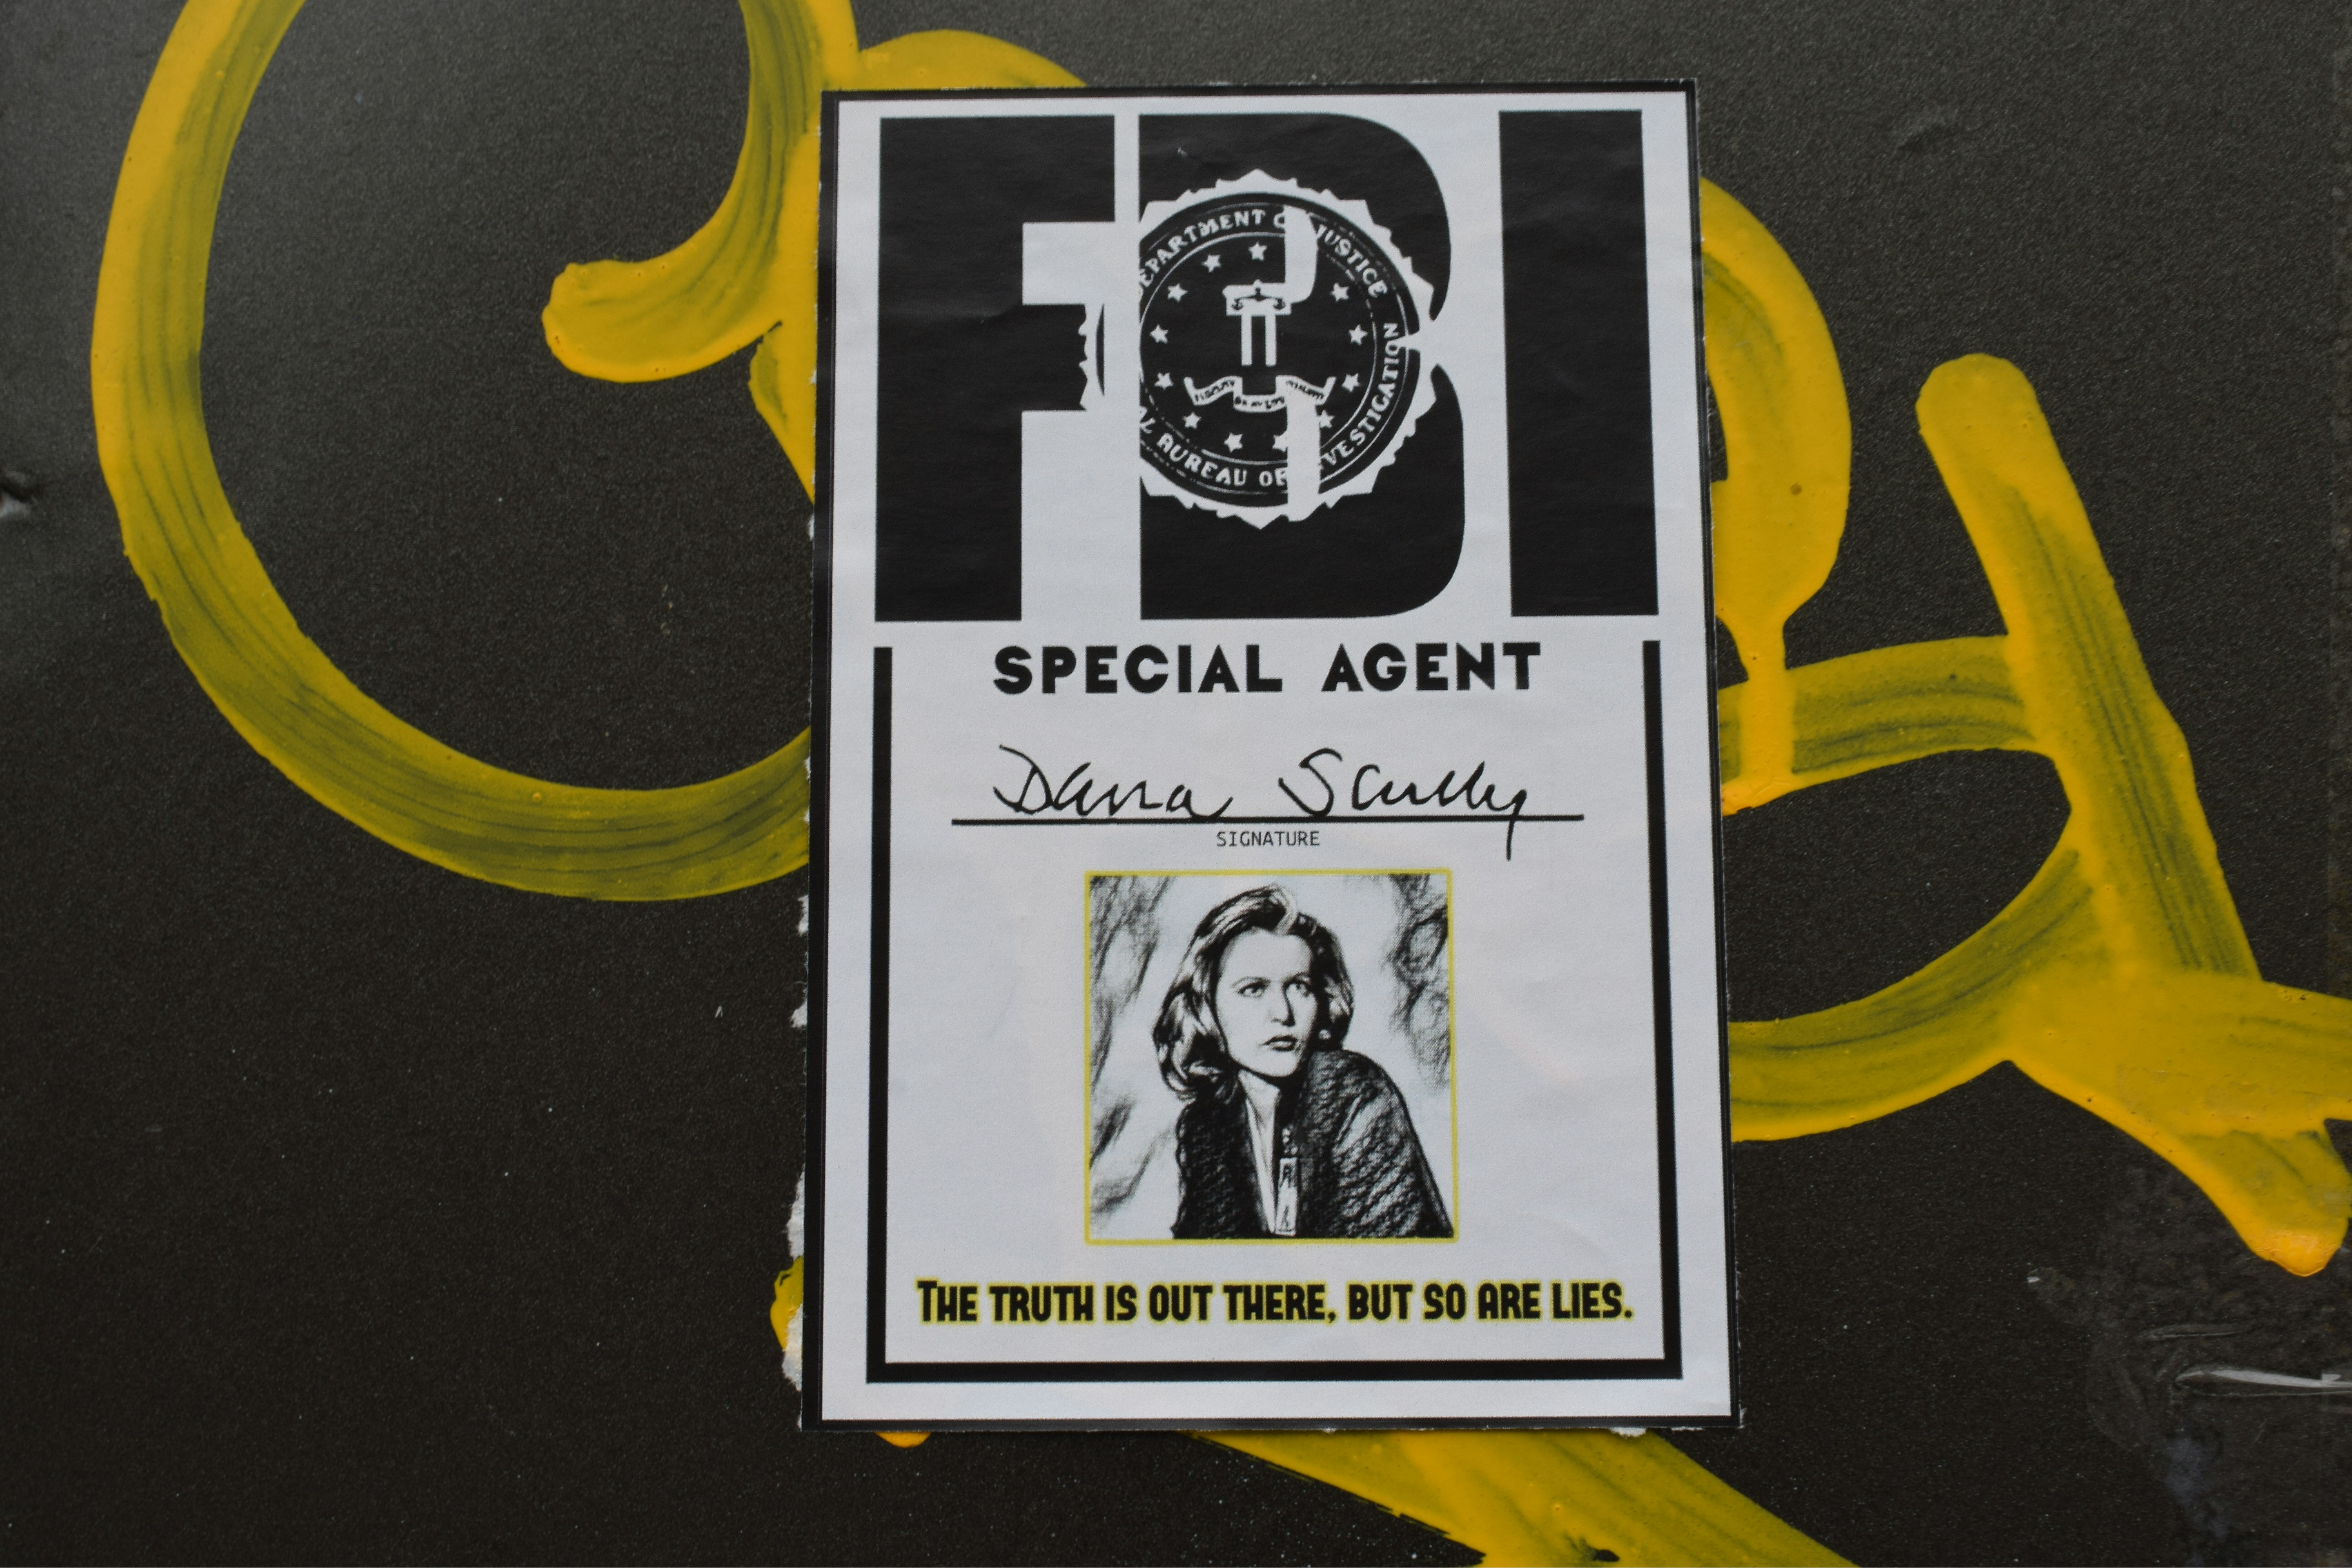 As a great fan of X-Files during the 90's I created this sticker with the favorite quote: The truth is out there, but so are lies. This quote can be related to today's world. 